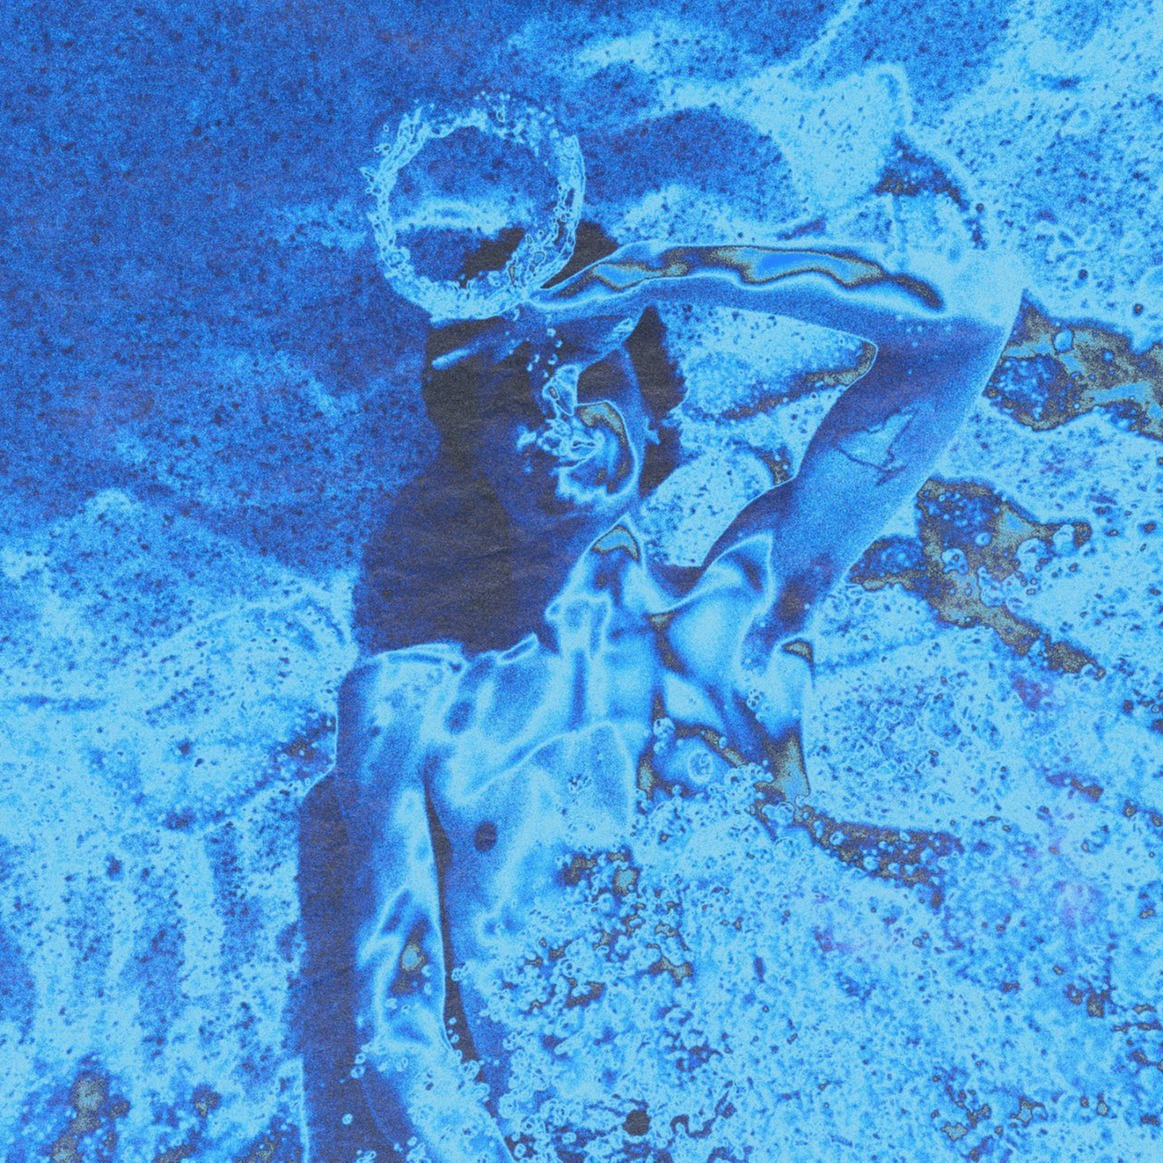 The front album cover of Submerged featuring the late Keaton blowing rings underwater, everything has a blue filter.